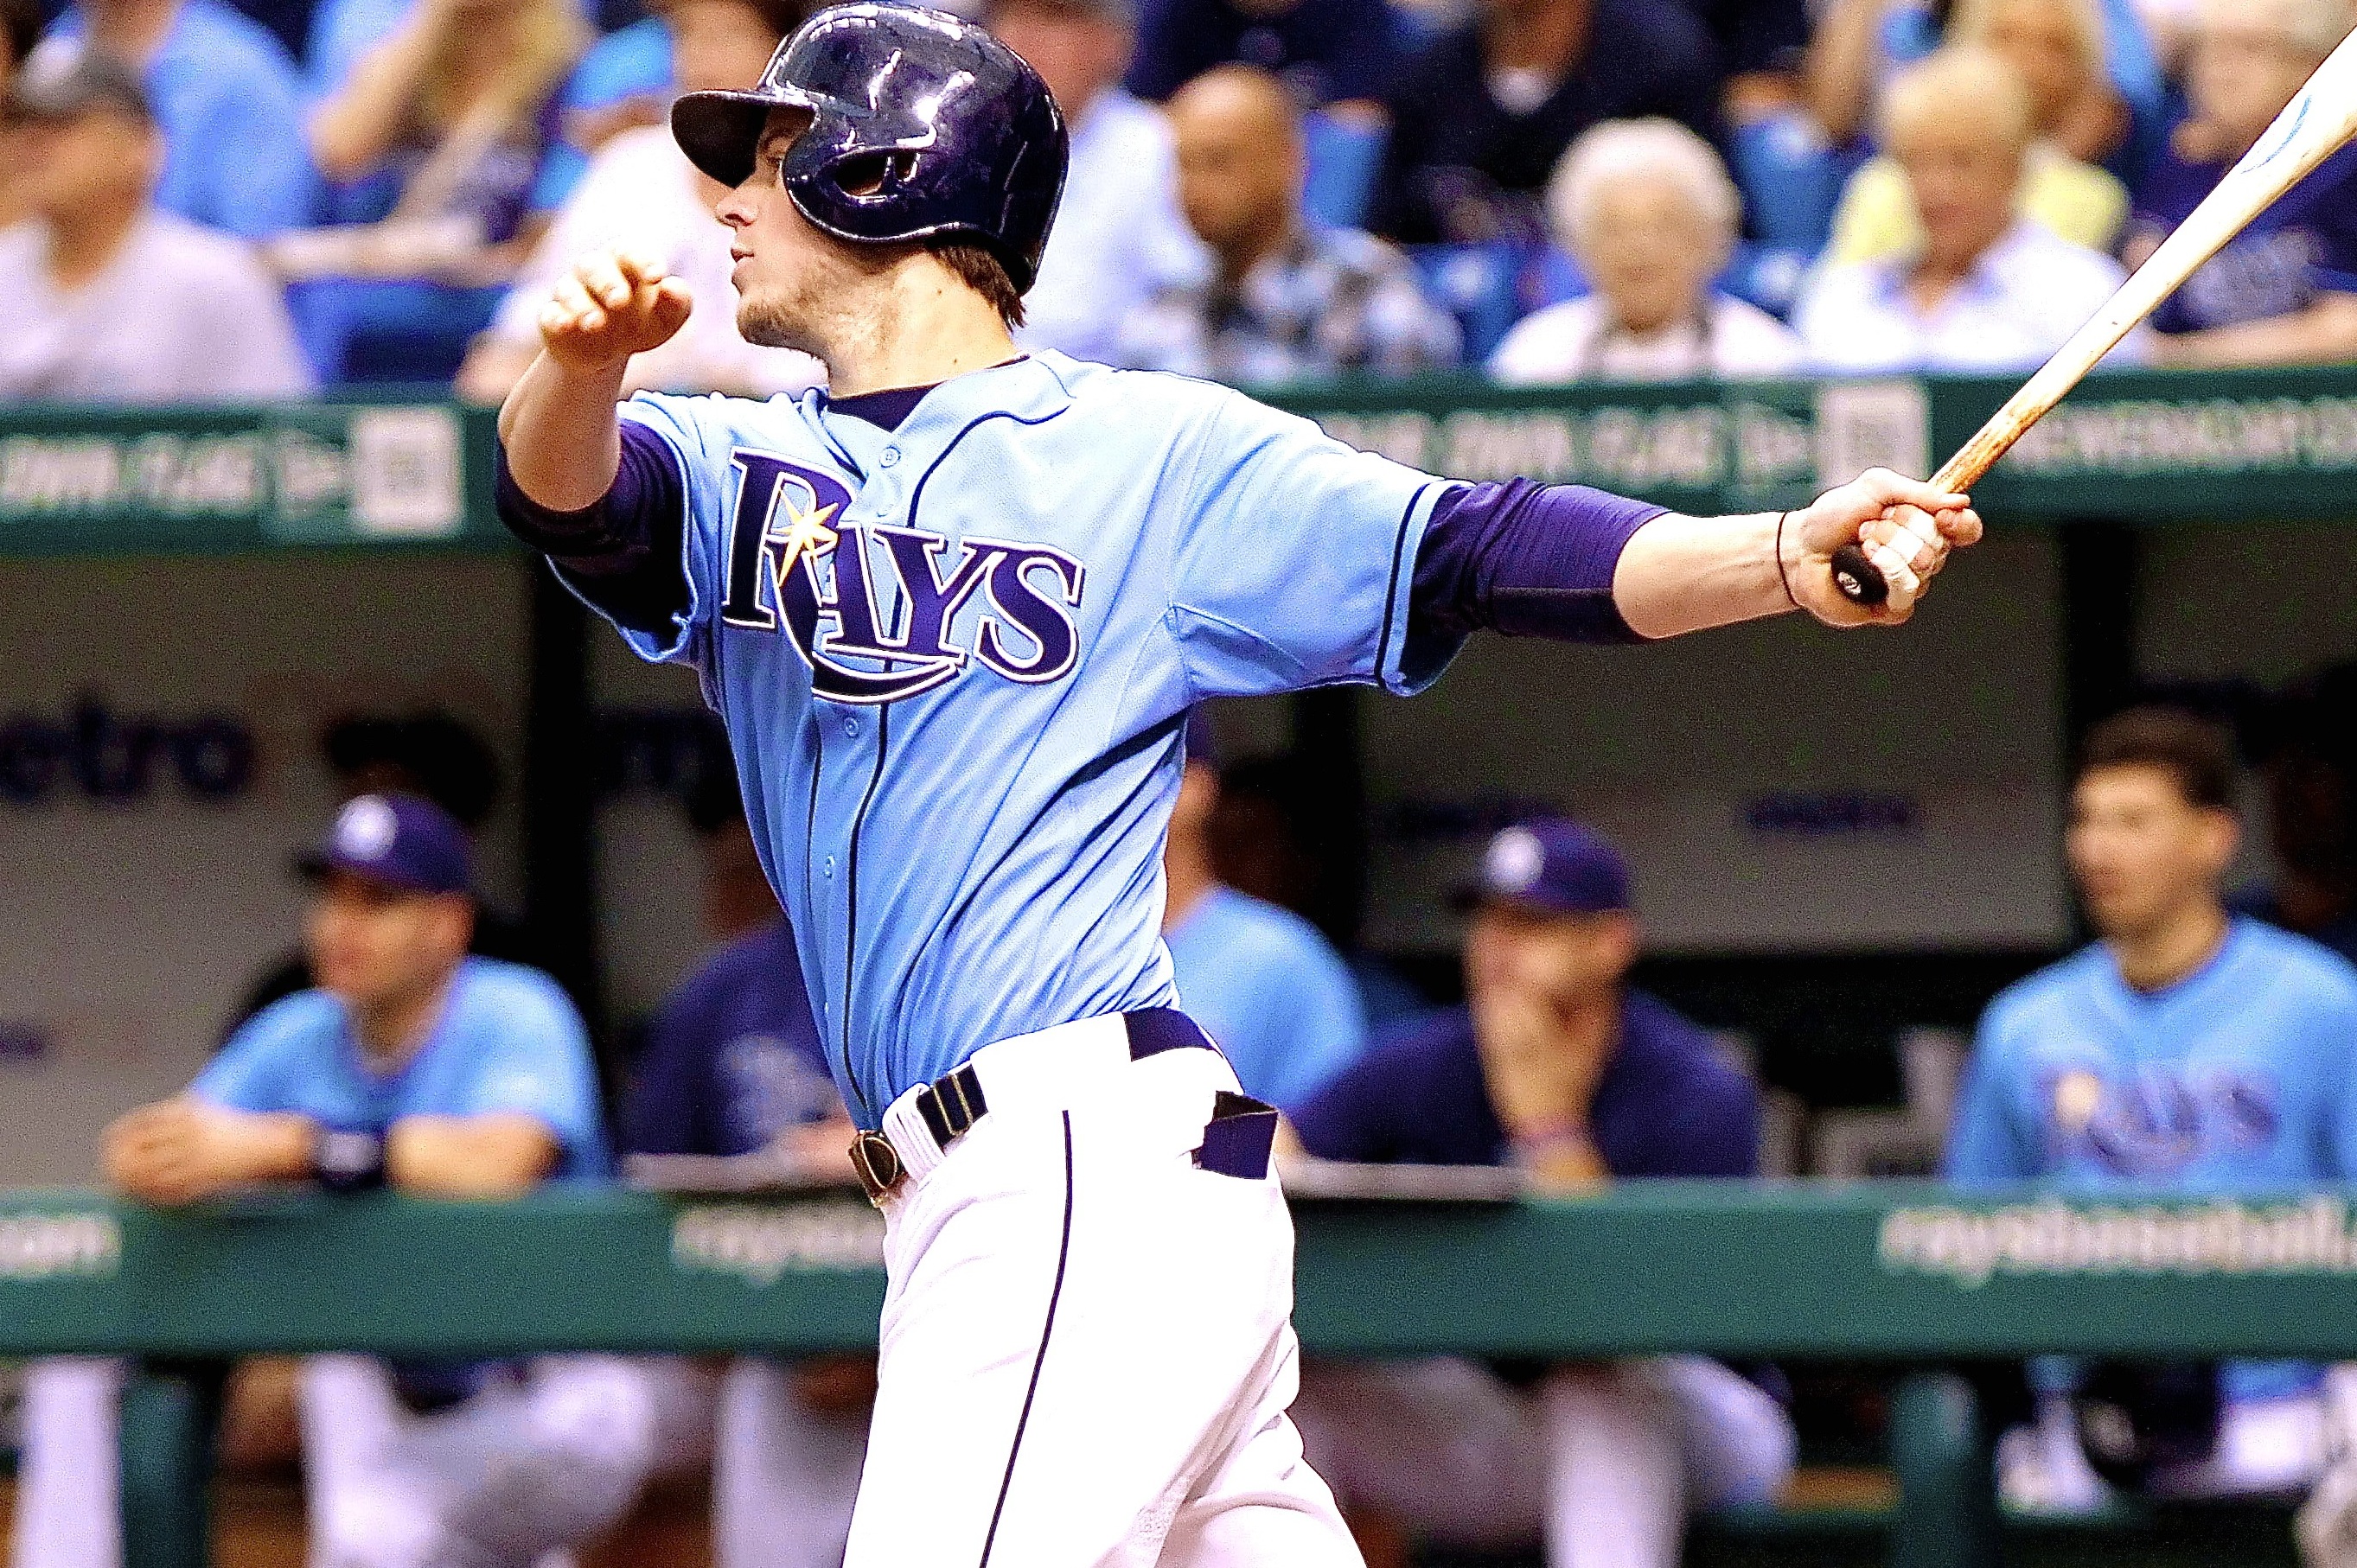 Rays' Wil Myers, Marlins' Jose Fernandez win rookie of the yaer awards  easily